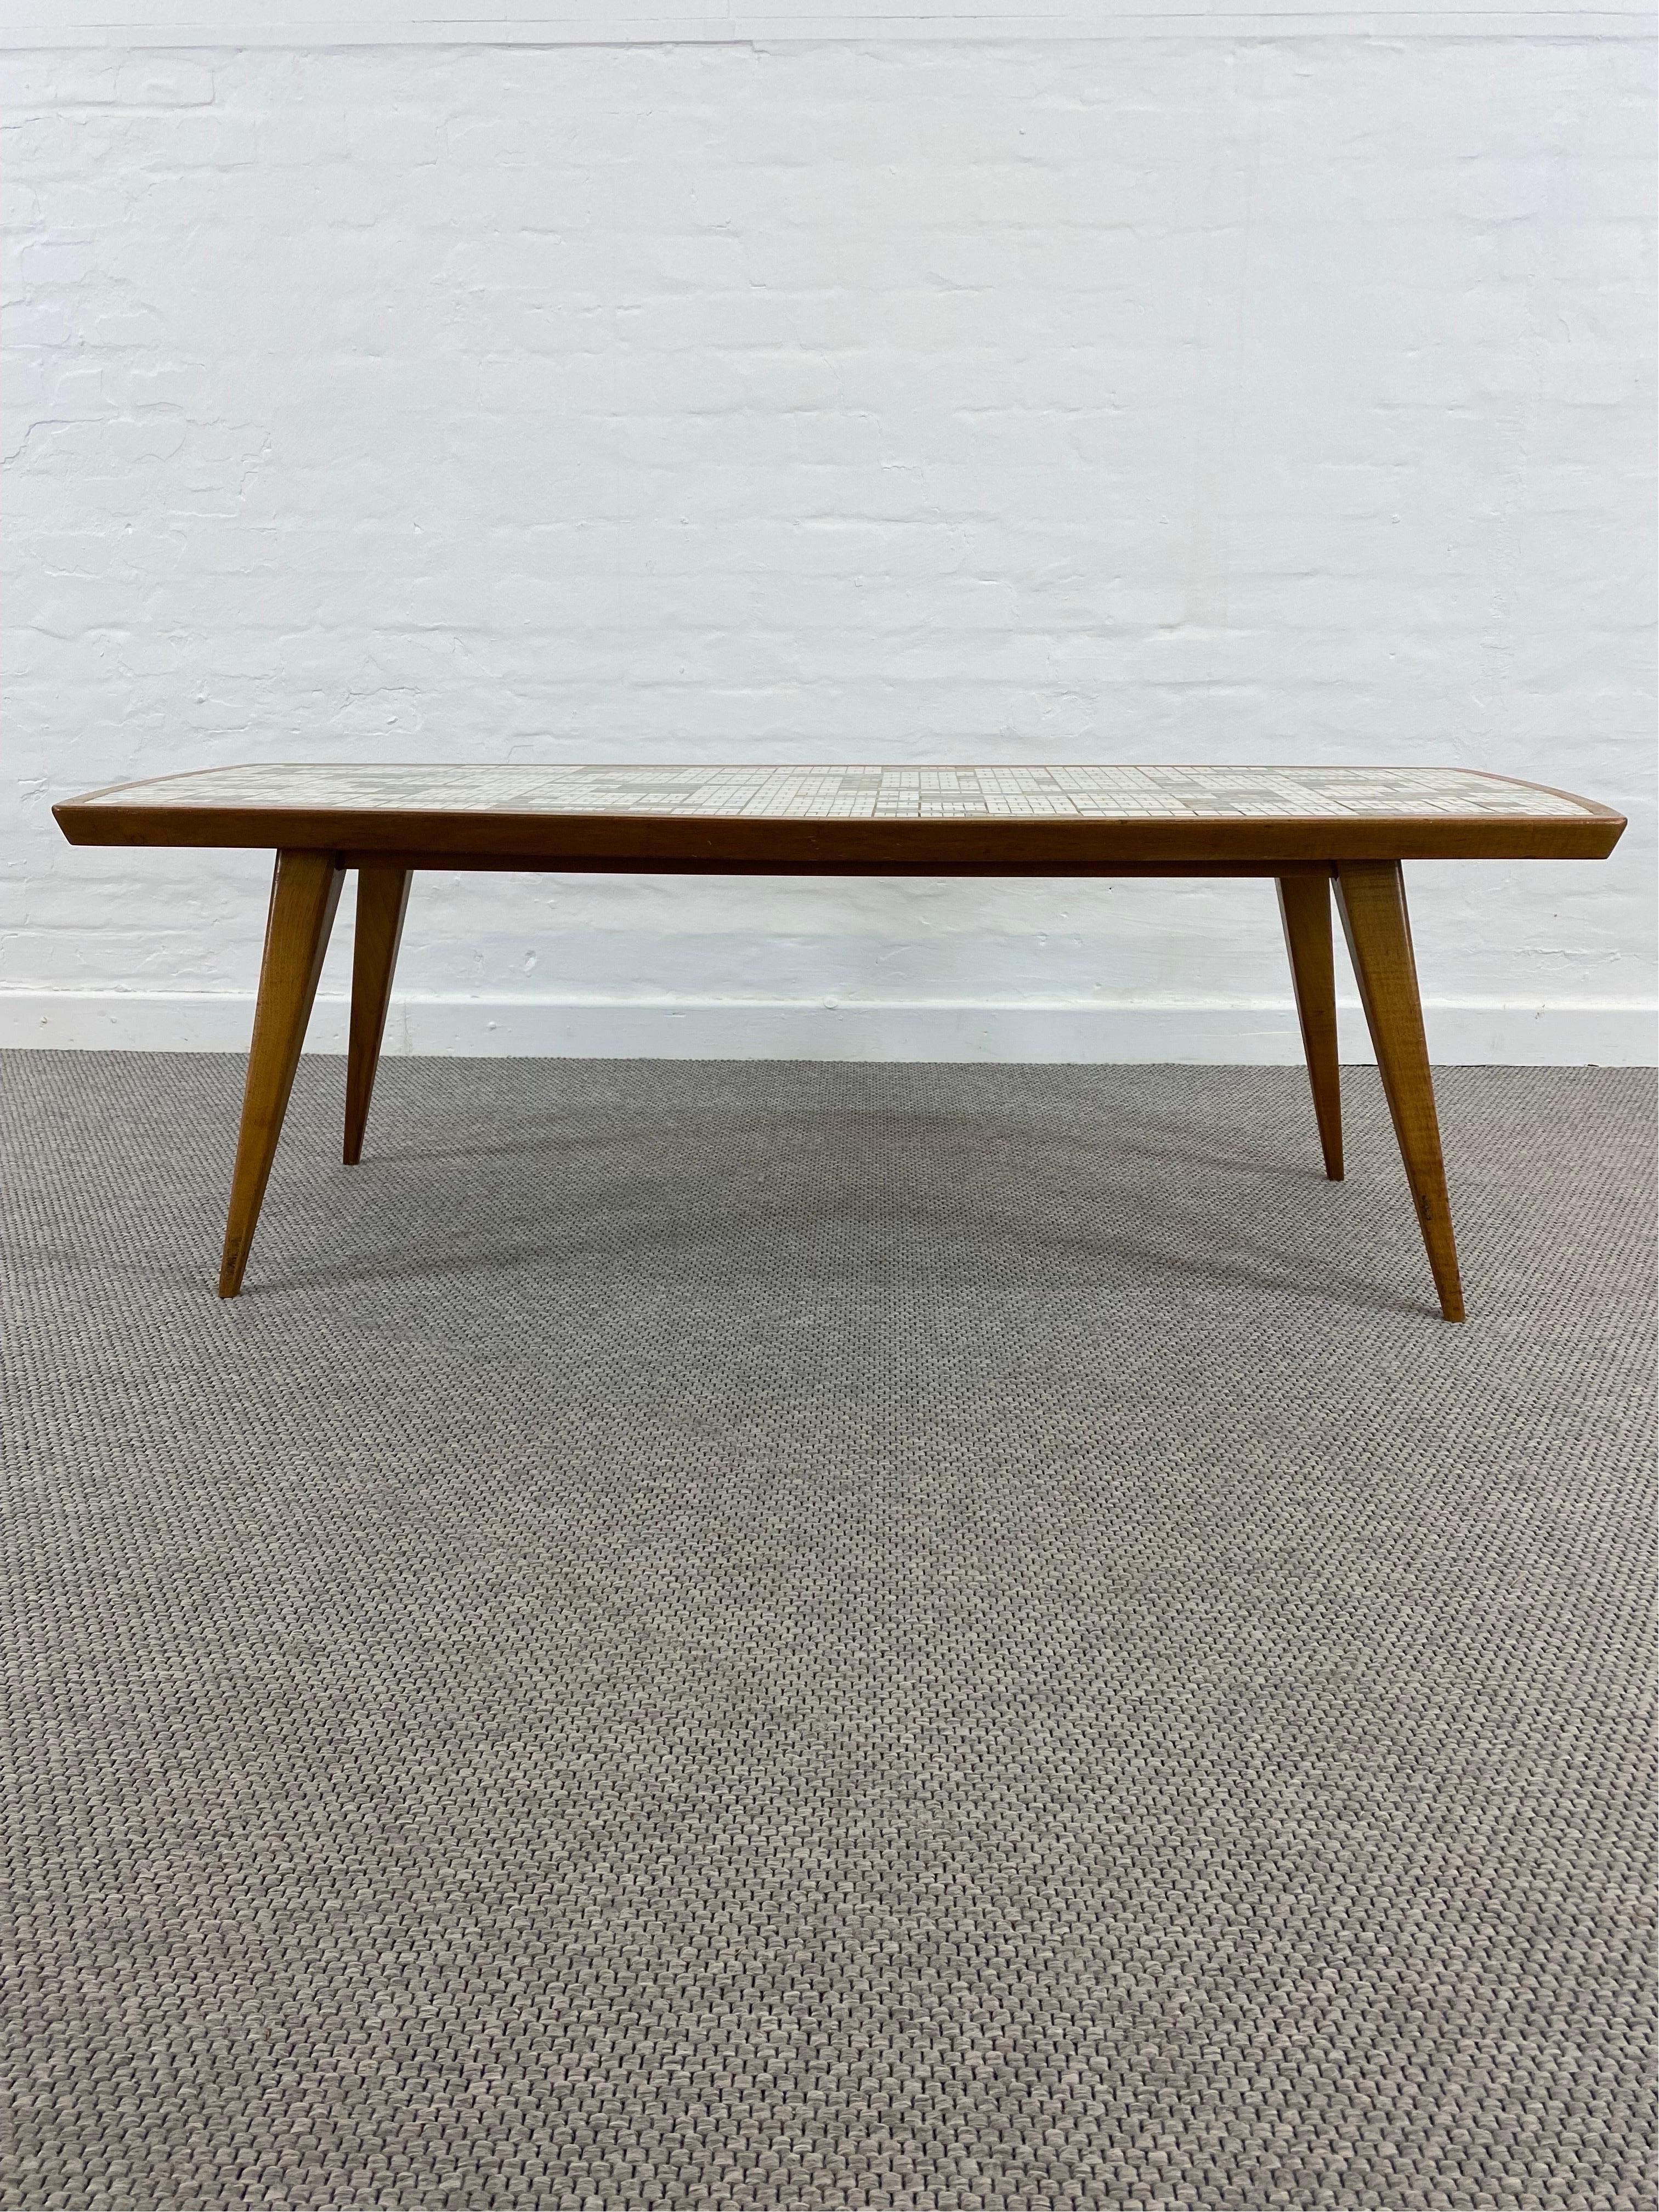 Midcentury 50s Mosaic and Wood Coffee table by Berthold Müller-Oerlinghausen For Sale 3